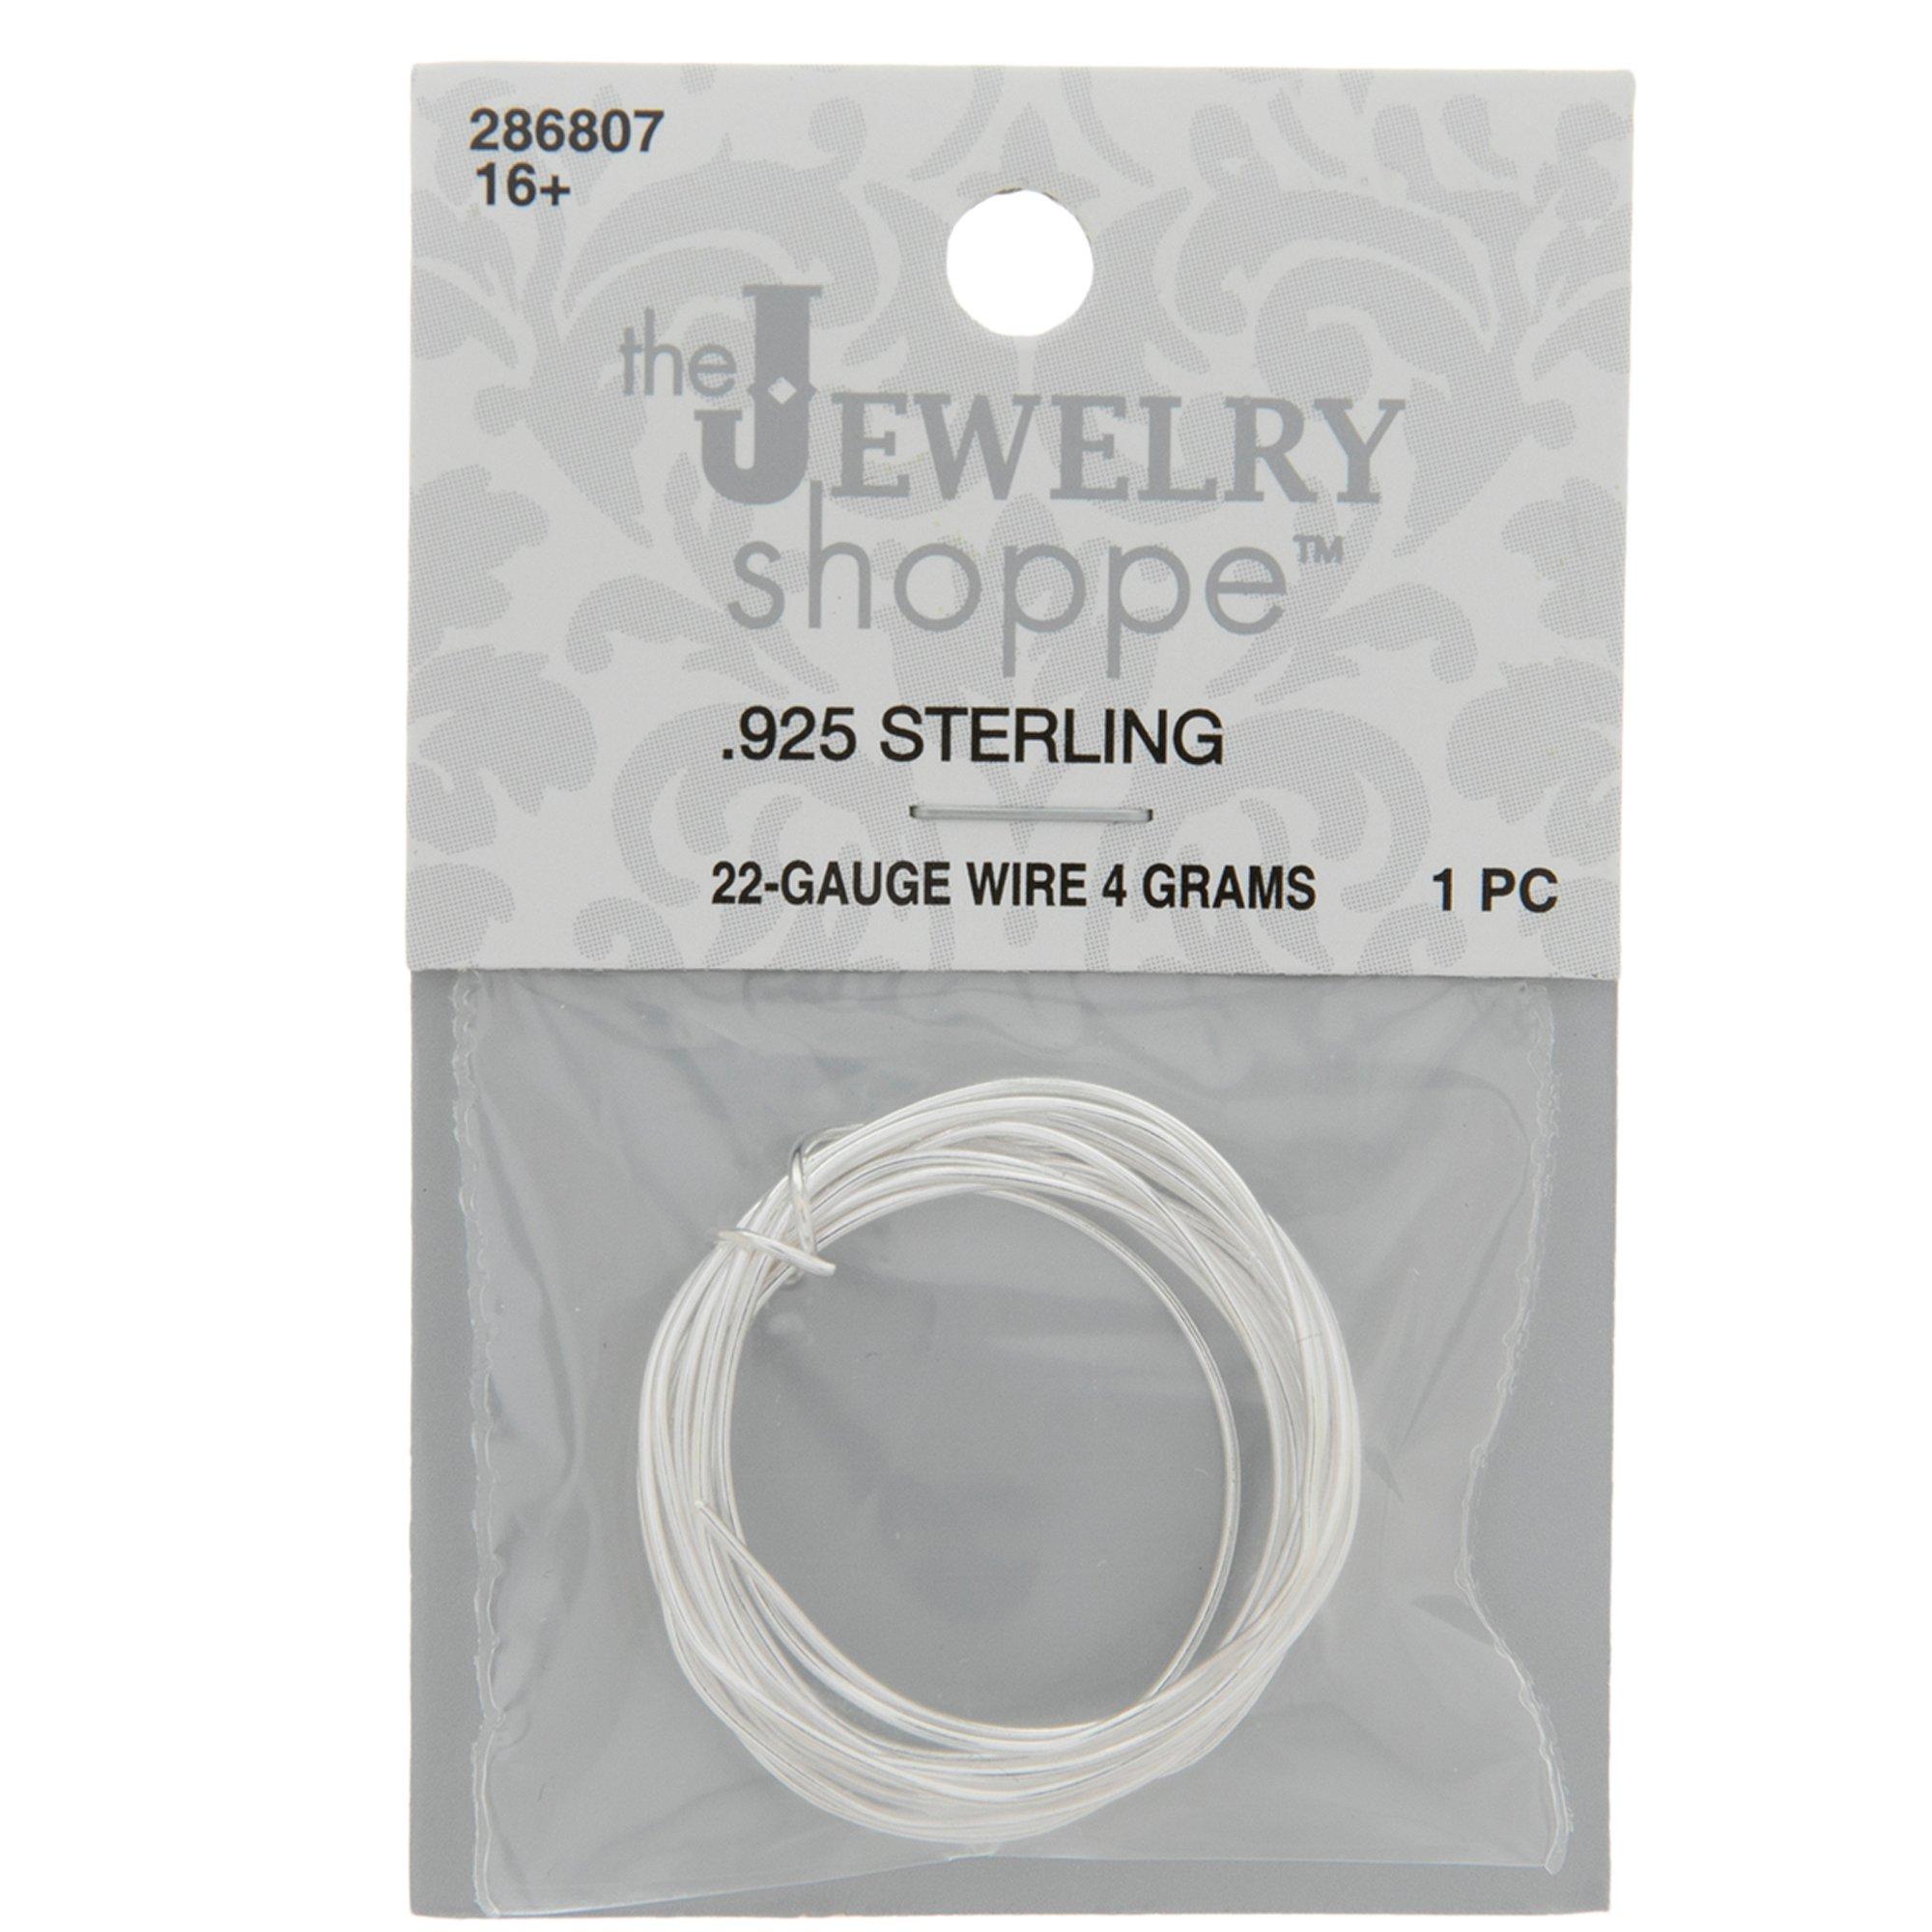 18 Gauge Half Round Dead Soft .925 Sterling Silver Wire: Jewelry Making  Supplies, Instructions